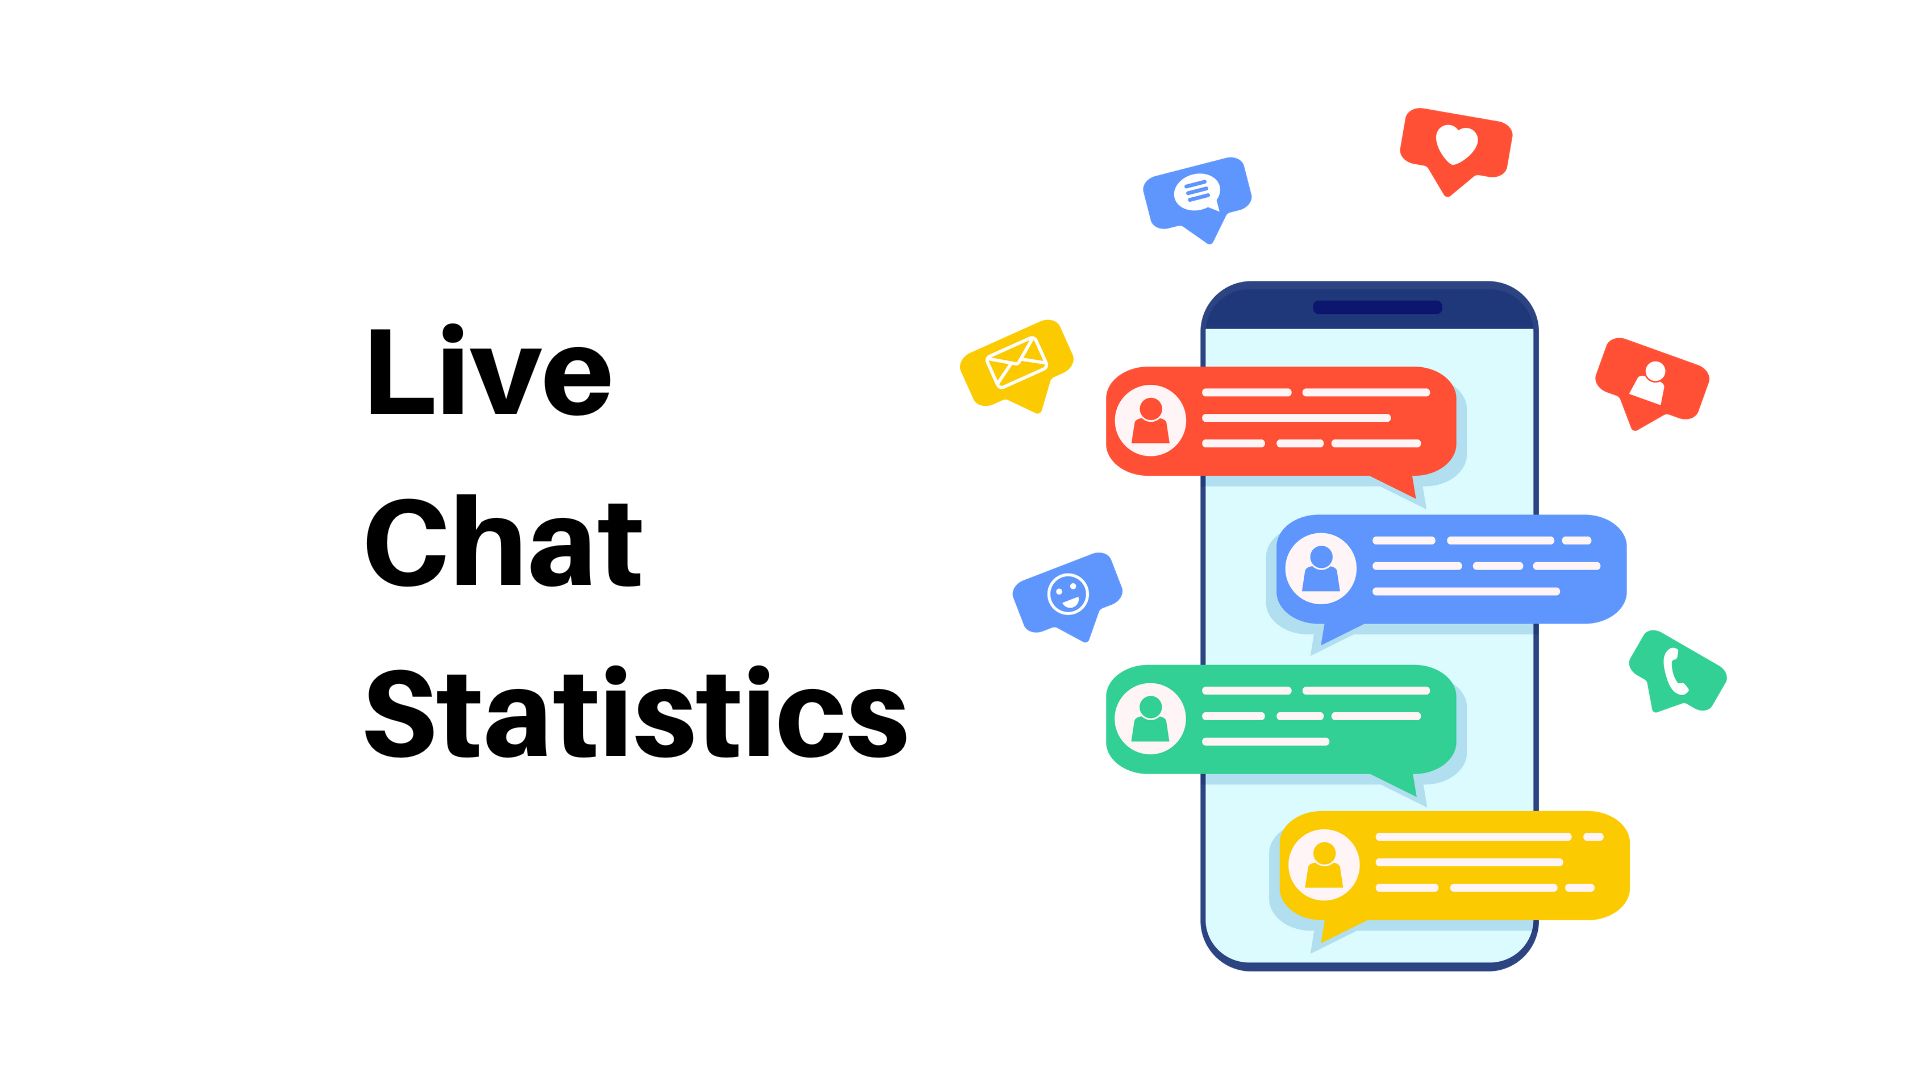 Live Chat Statistics By Usage, Demographic, Reason, Technologies Market Share, Customer Preference, Company Improvement and Platforms